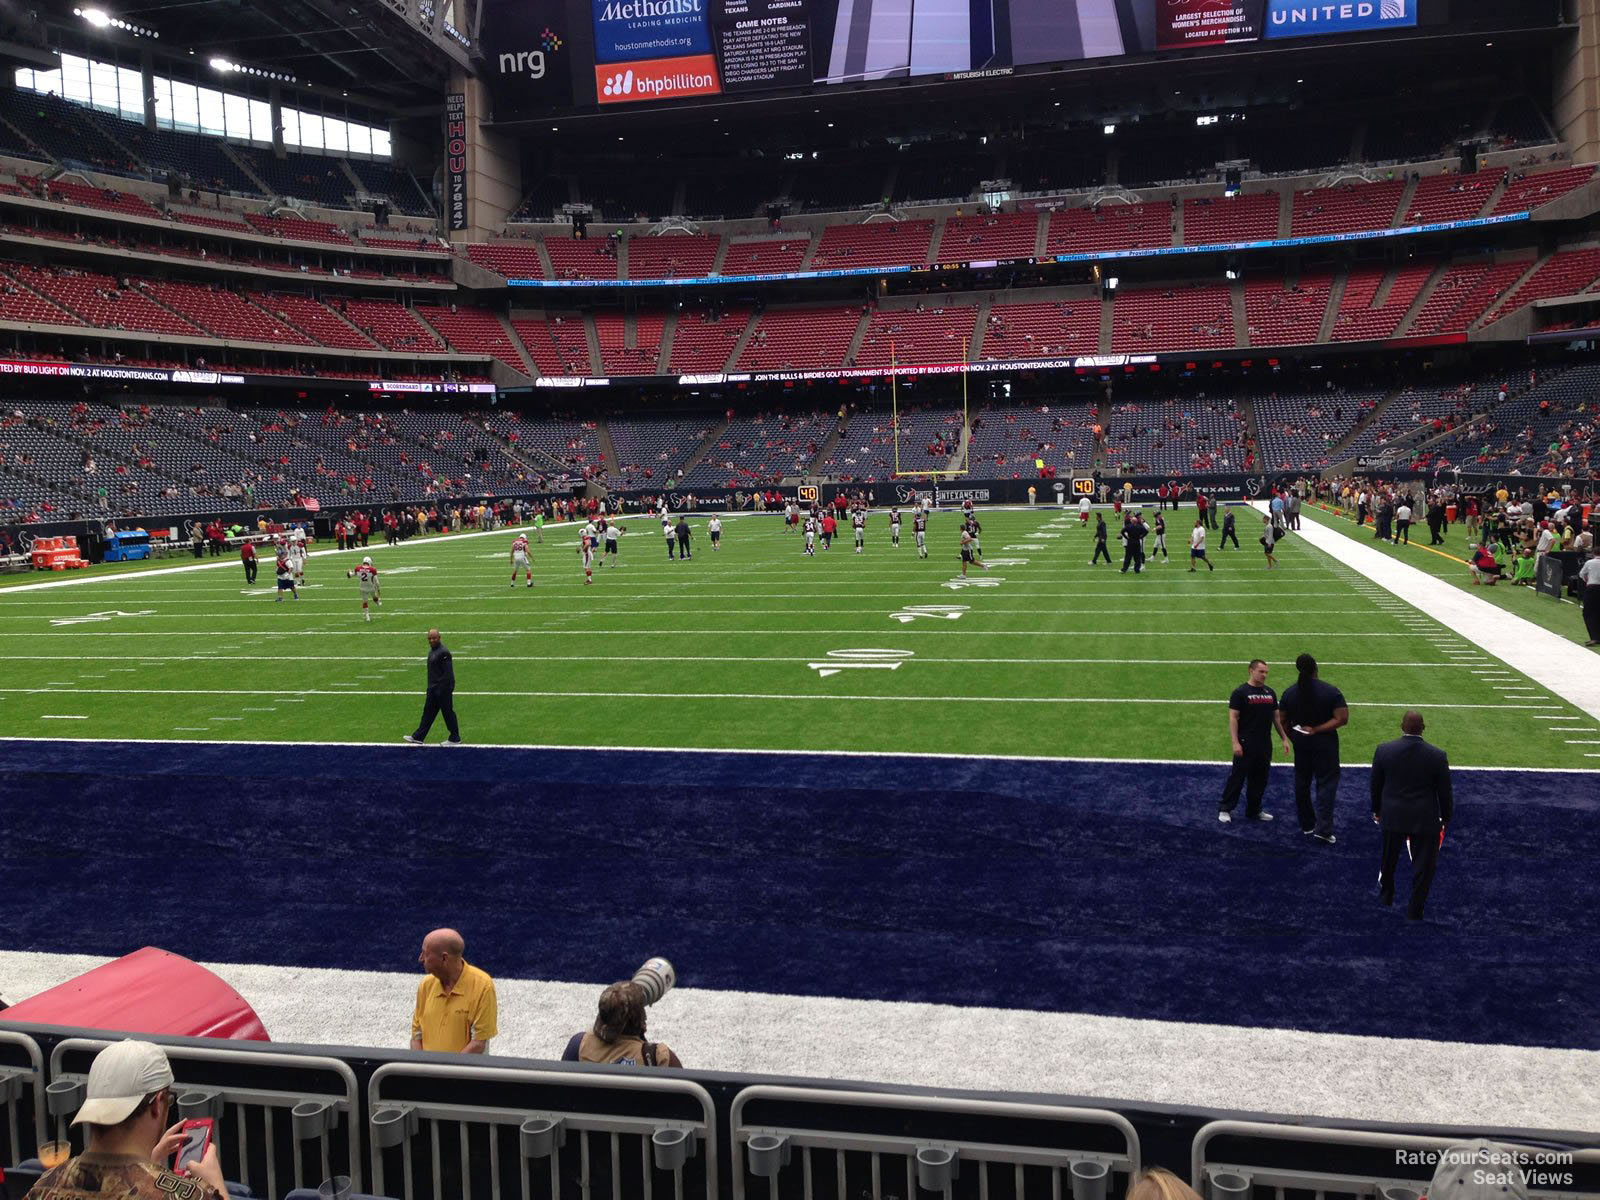 section 115, row c seat view  for football - nrg stadium